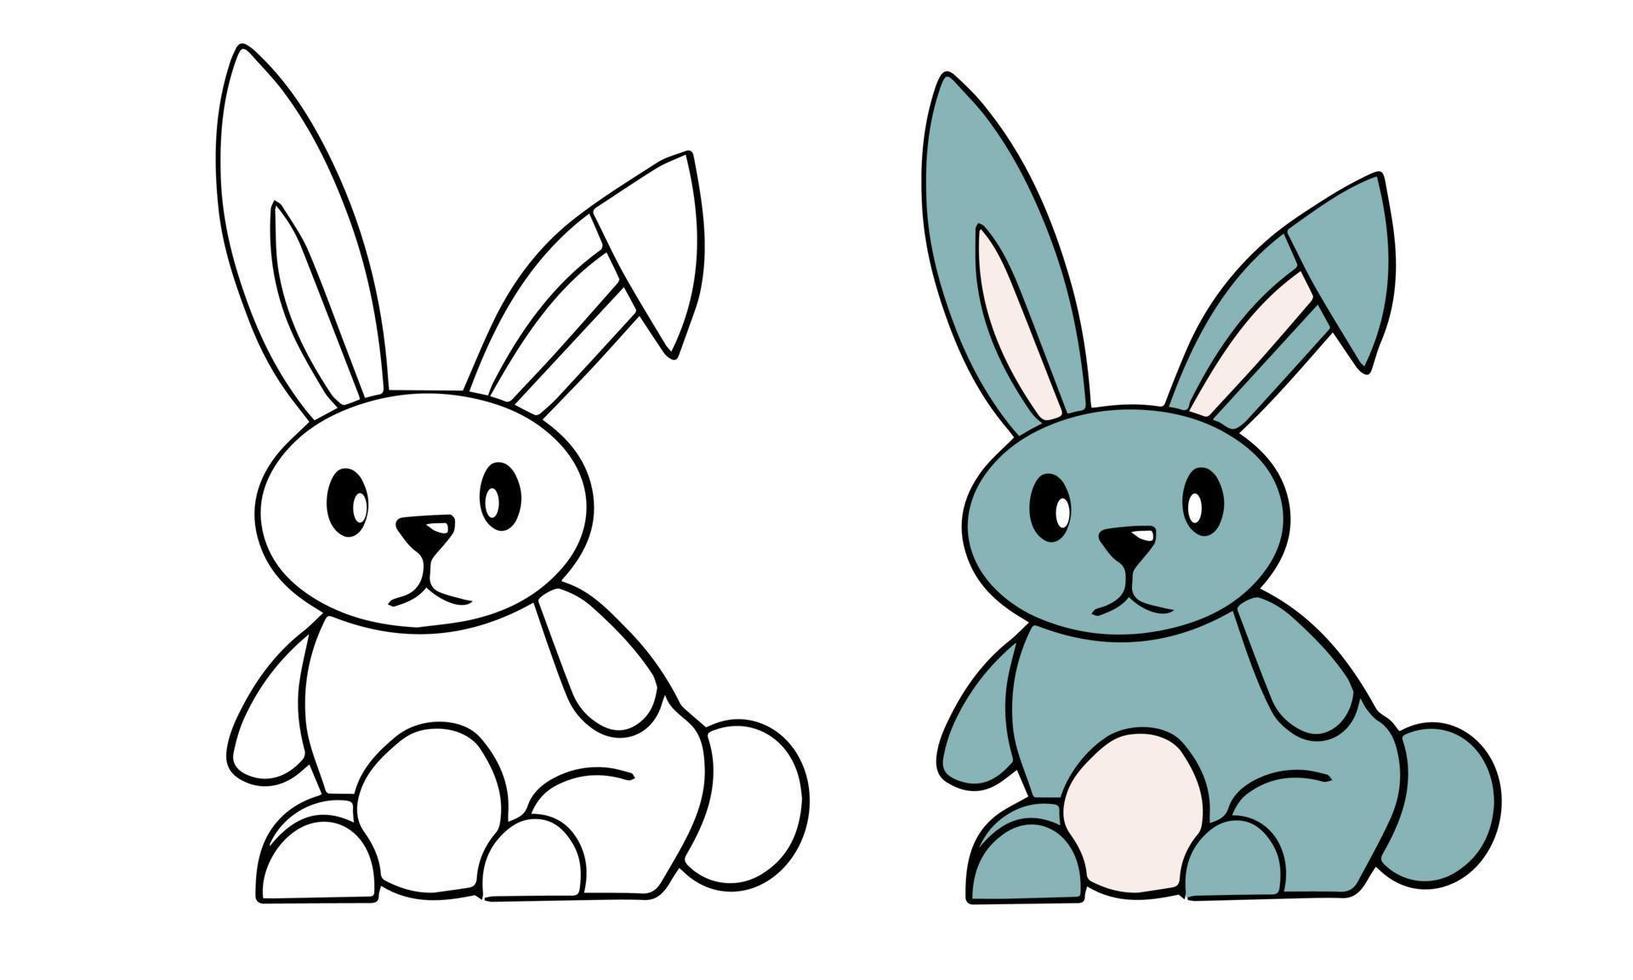 Vector coloring page cartoon character for children. Cute bunny. Line art and beast in color for example. Learning to drawing